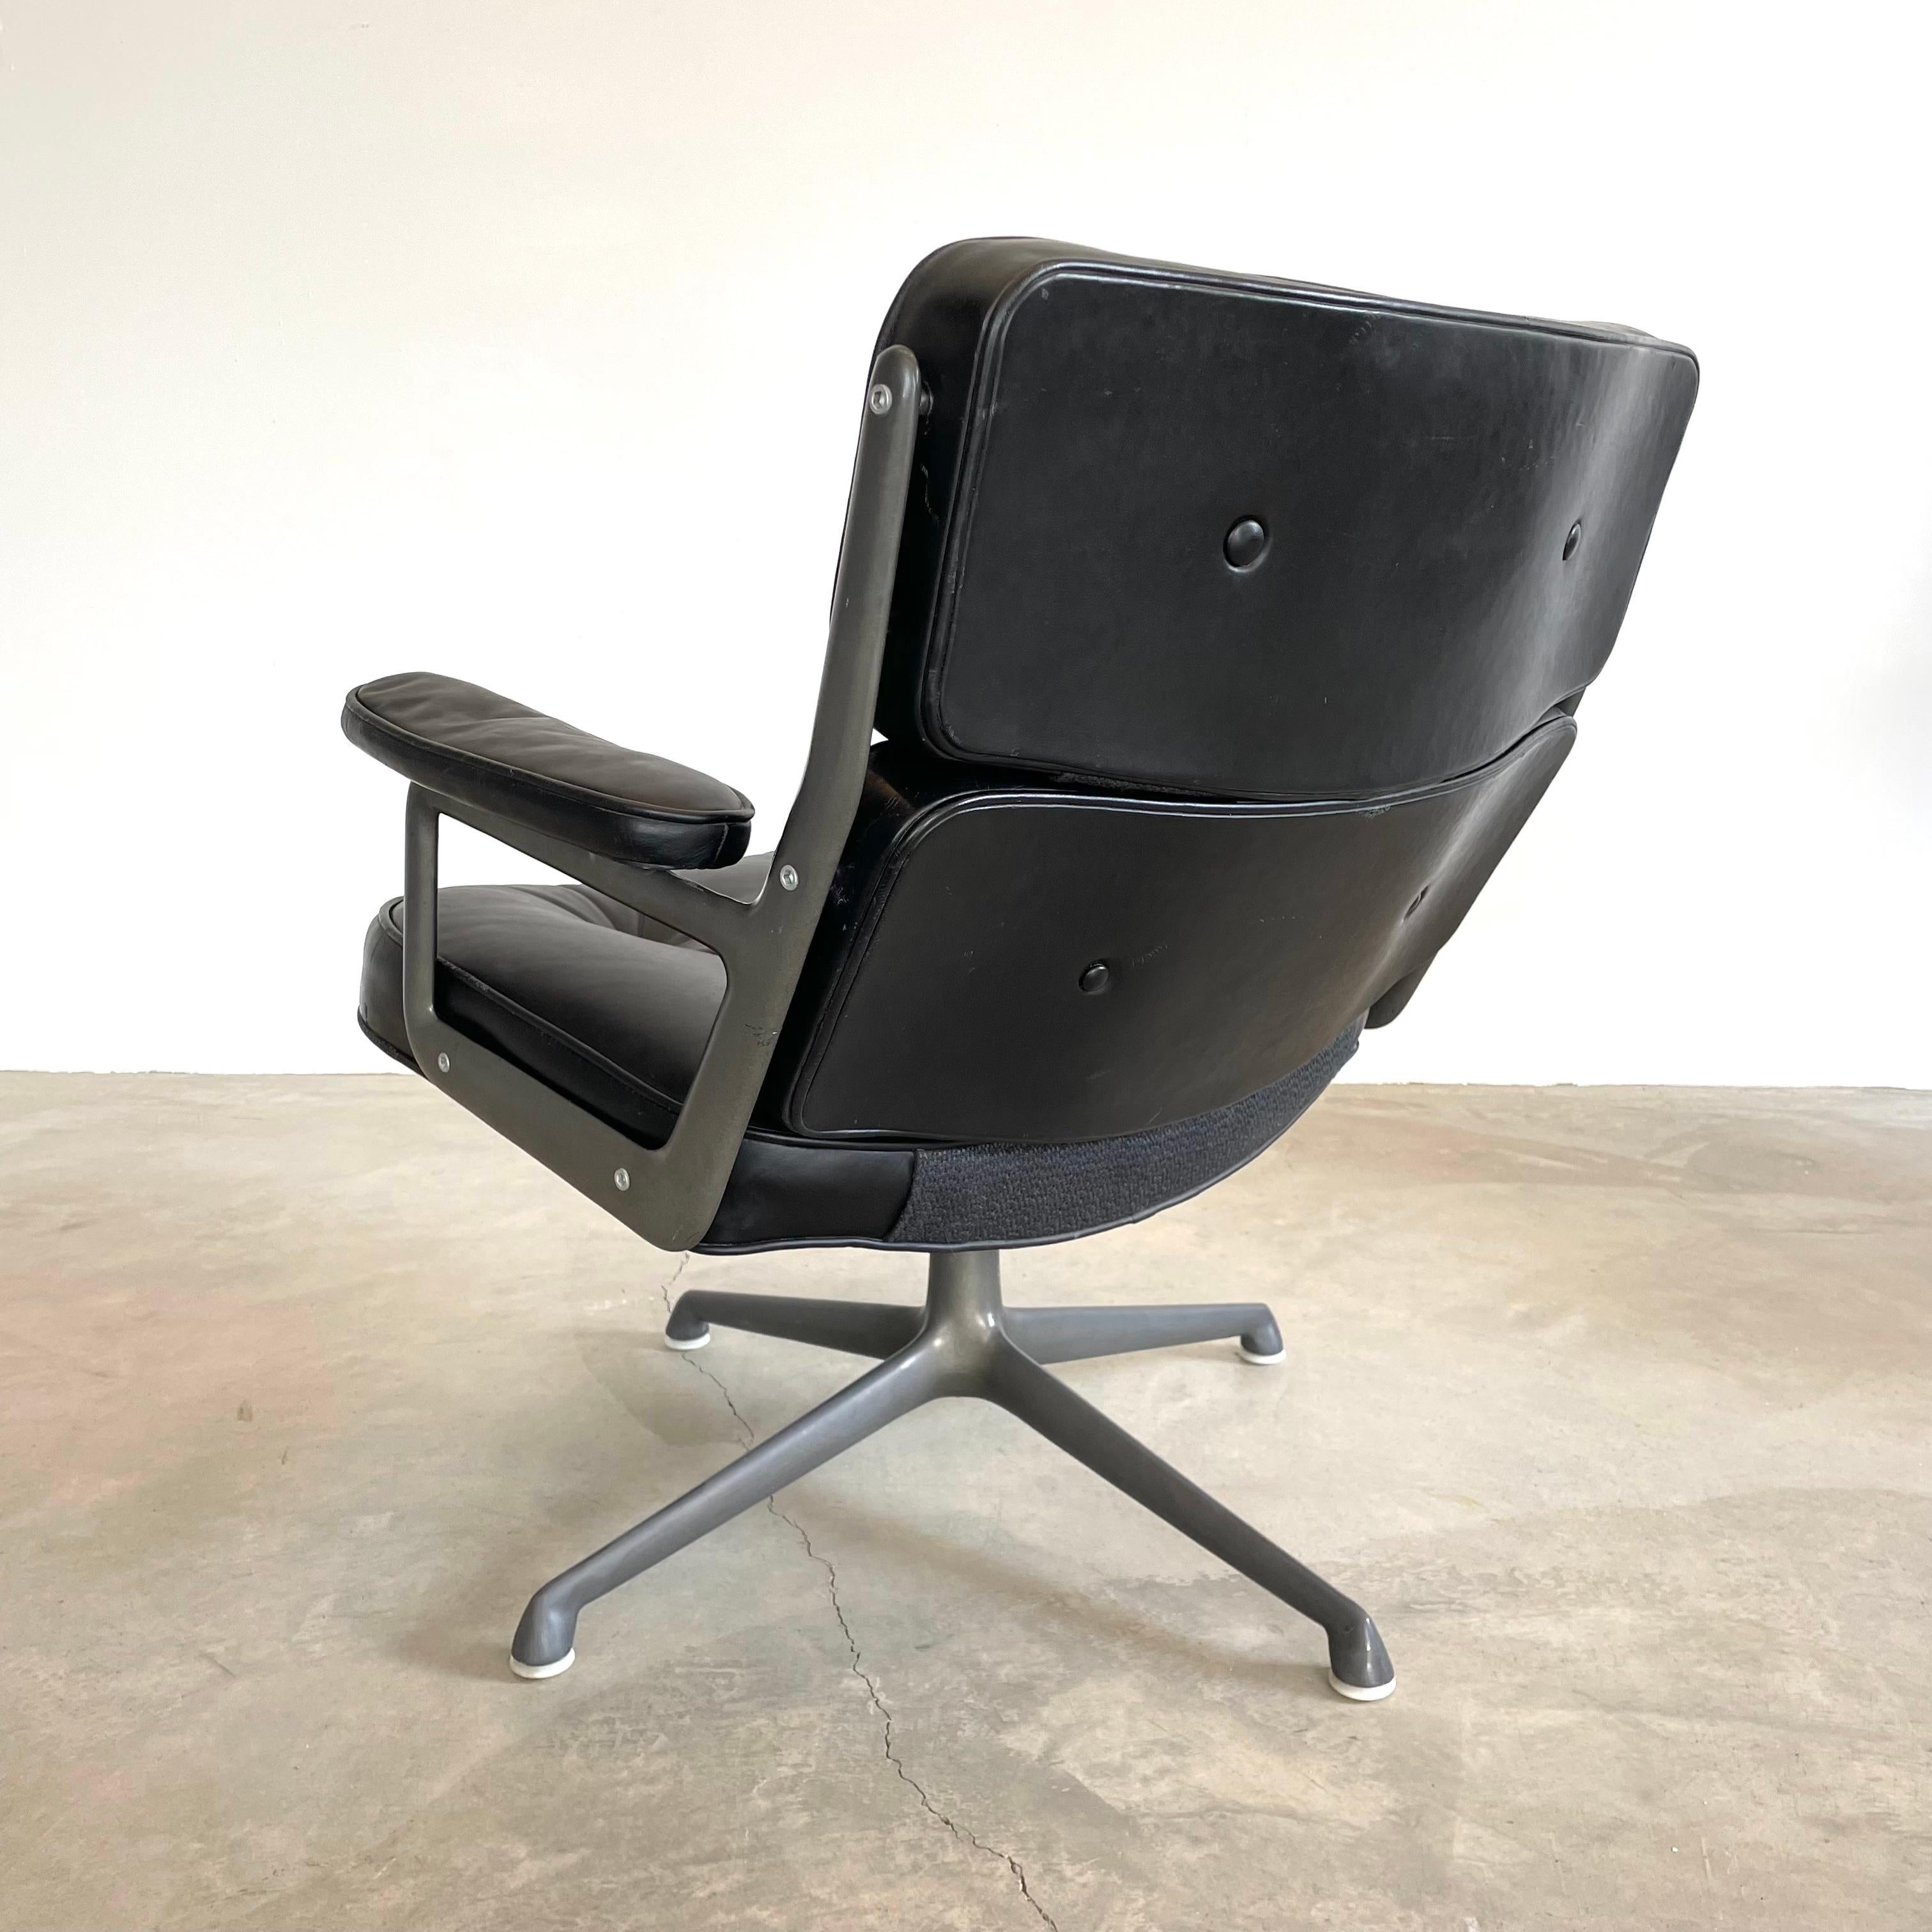 Aluminum Eames Time Life Lobby Lounge Chair in Black Leather for Herman Miller, 1980s USA For Sale